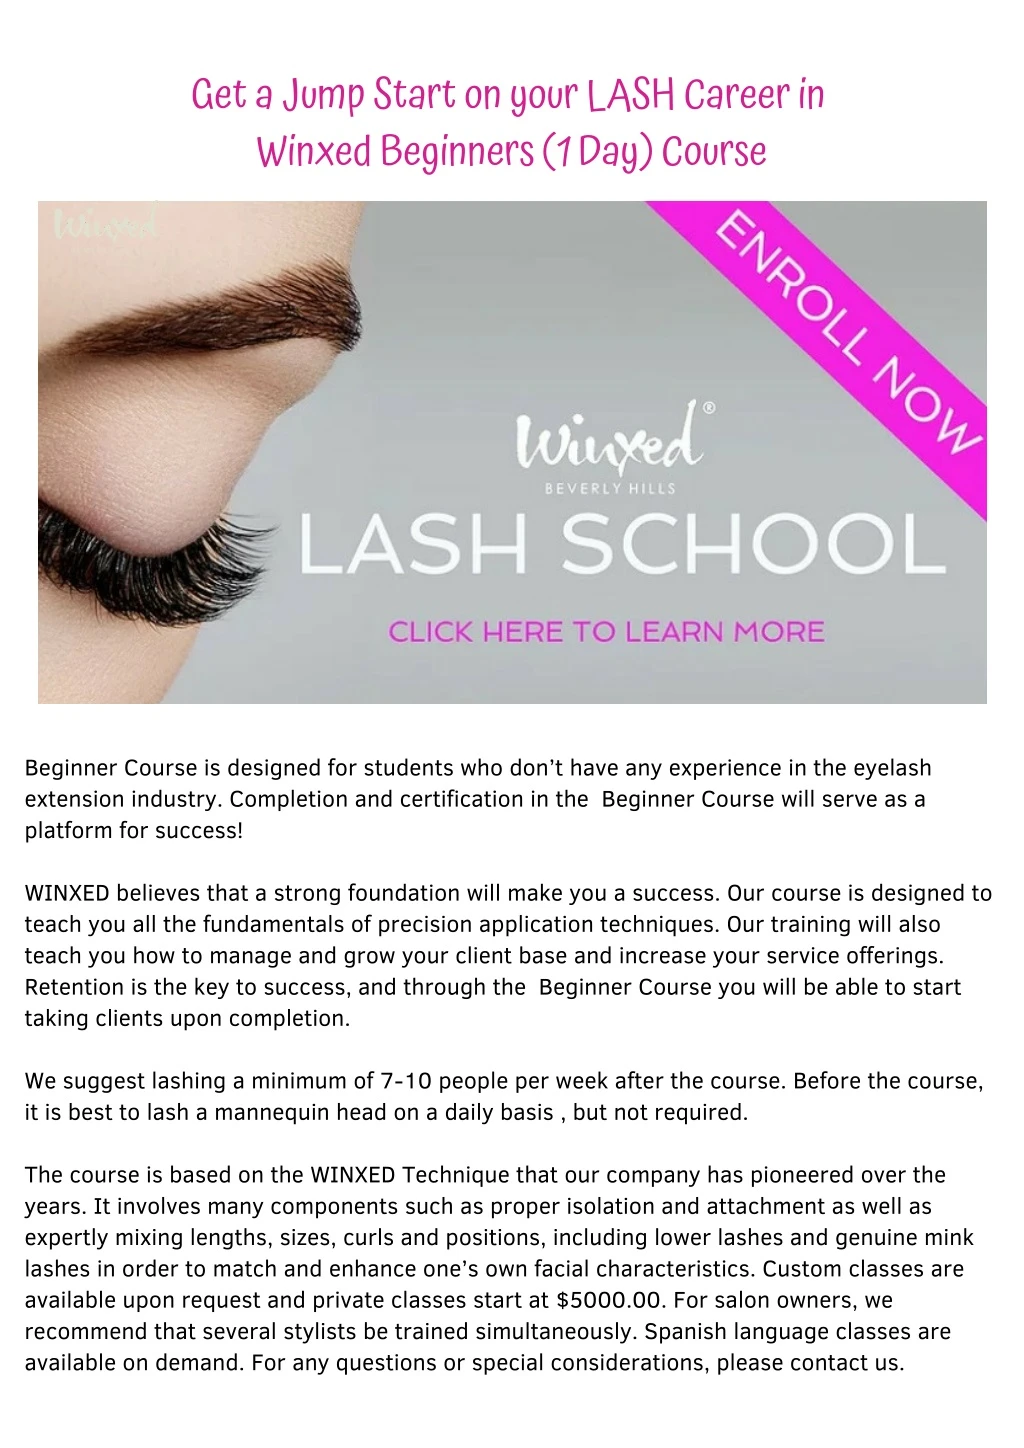 get a jump start on your lash career in winxed